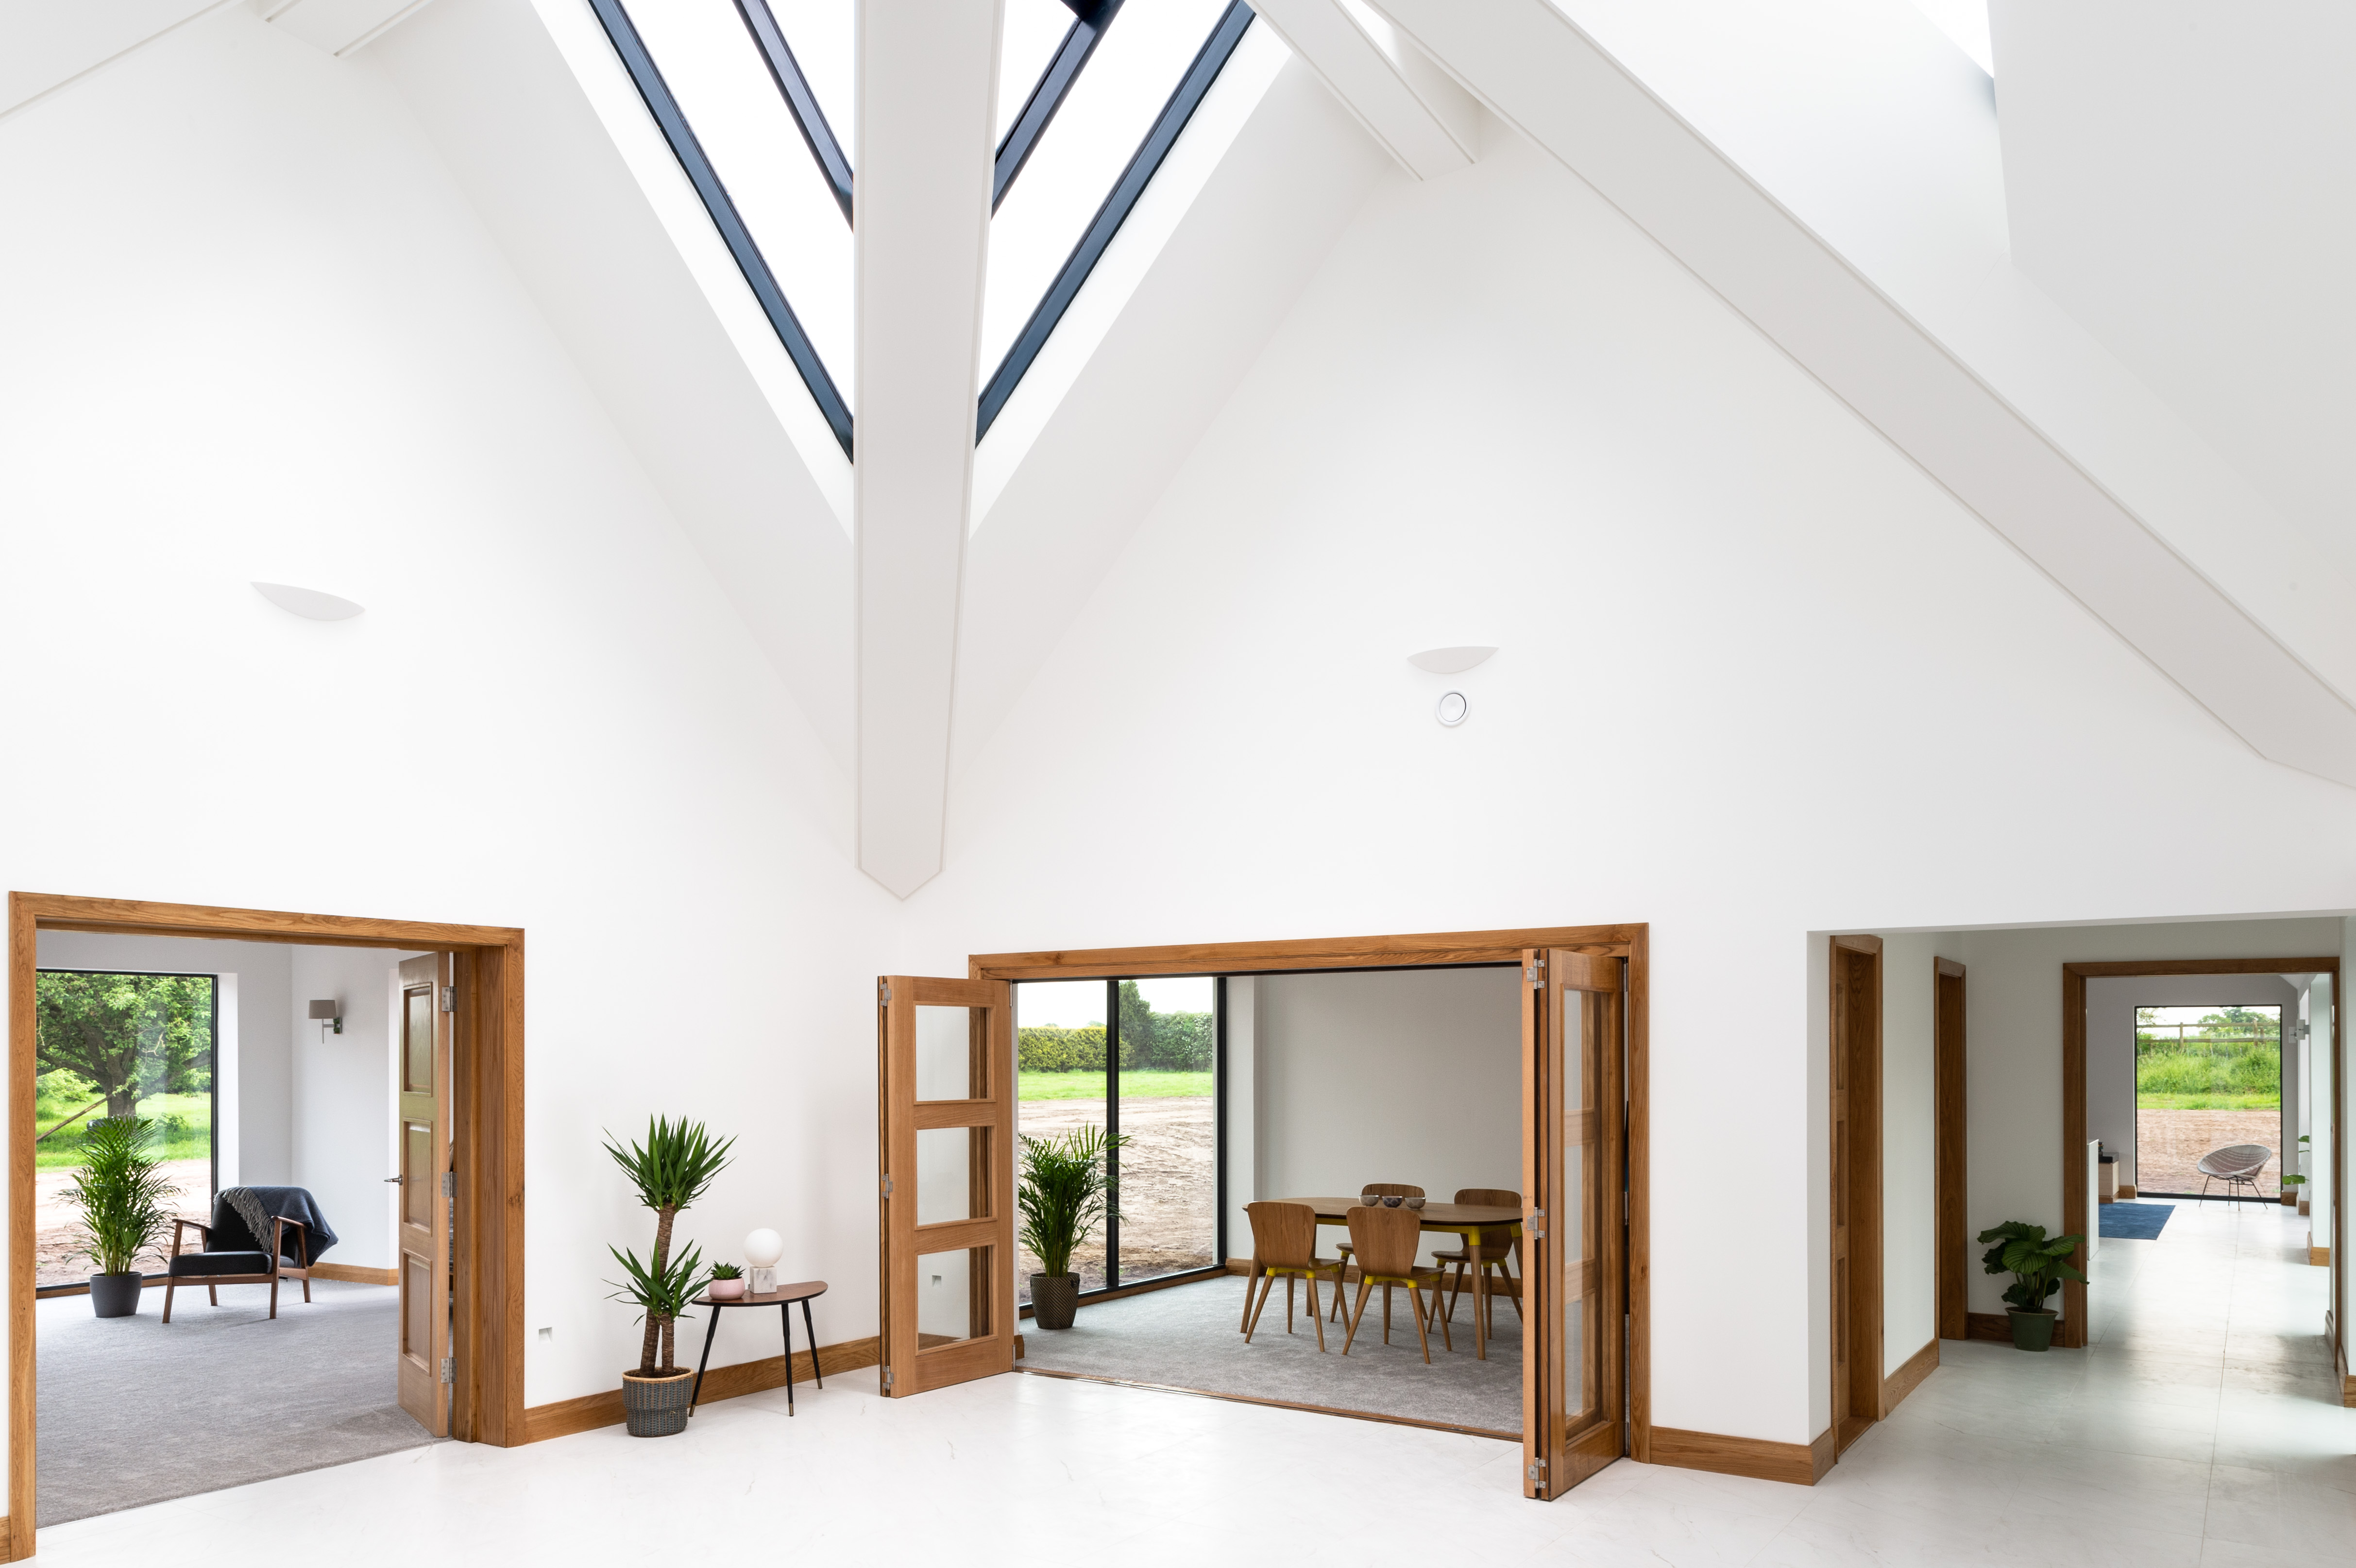 </p> <p>Find your ideal home design pro on designfor-me.com - get matched and see who's interested in your home project. Click image to see more inspiration from our design pros</p> <p>Design by Ian, architect from Trafford, North West</p> <p>#architecture #homedesign #modernhomes #homeinspiration #minimalistarchitecture #minimalistdecor #minimalistdesign #miminalism #selfbuilds #selfbuildinspiration #selfbuildideas #granddesigns #doubleheightspace</p> <p>